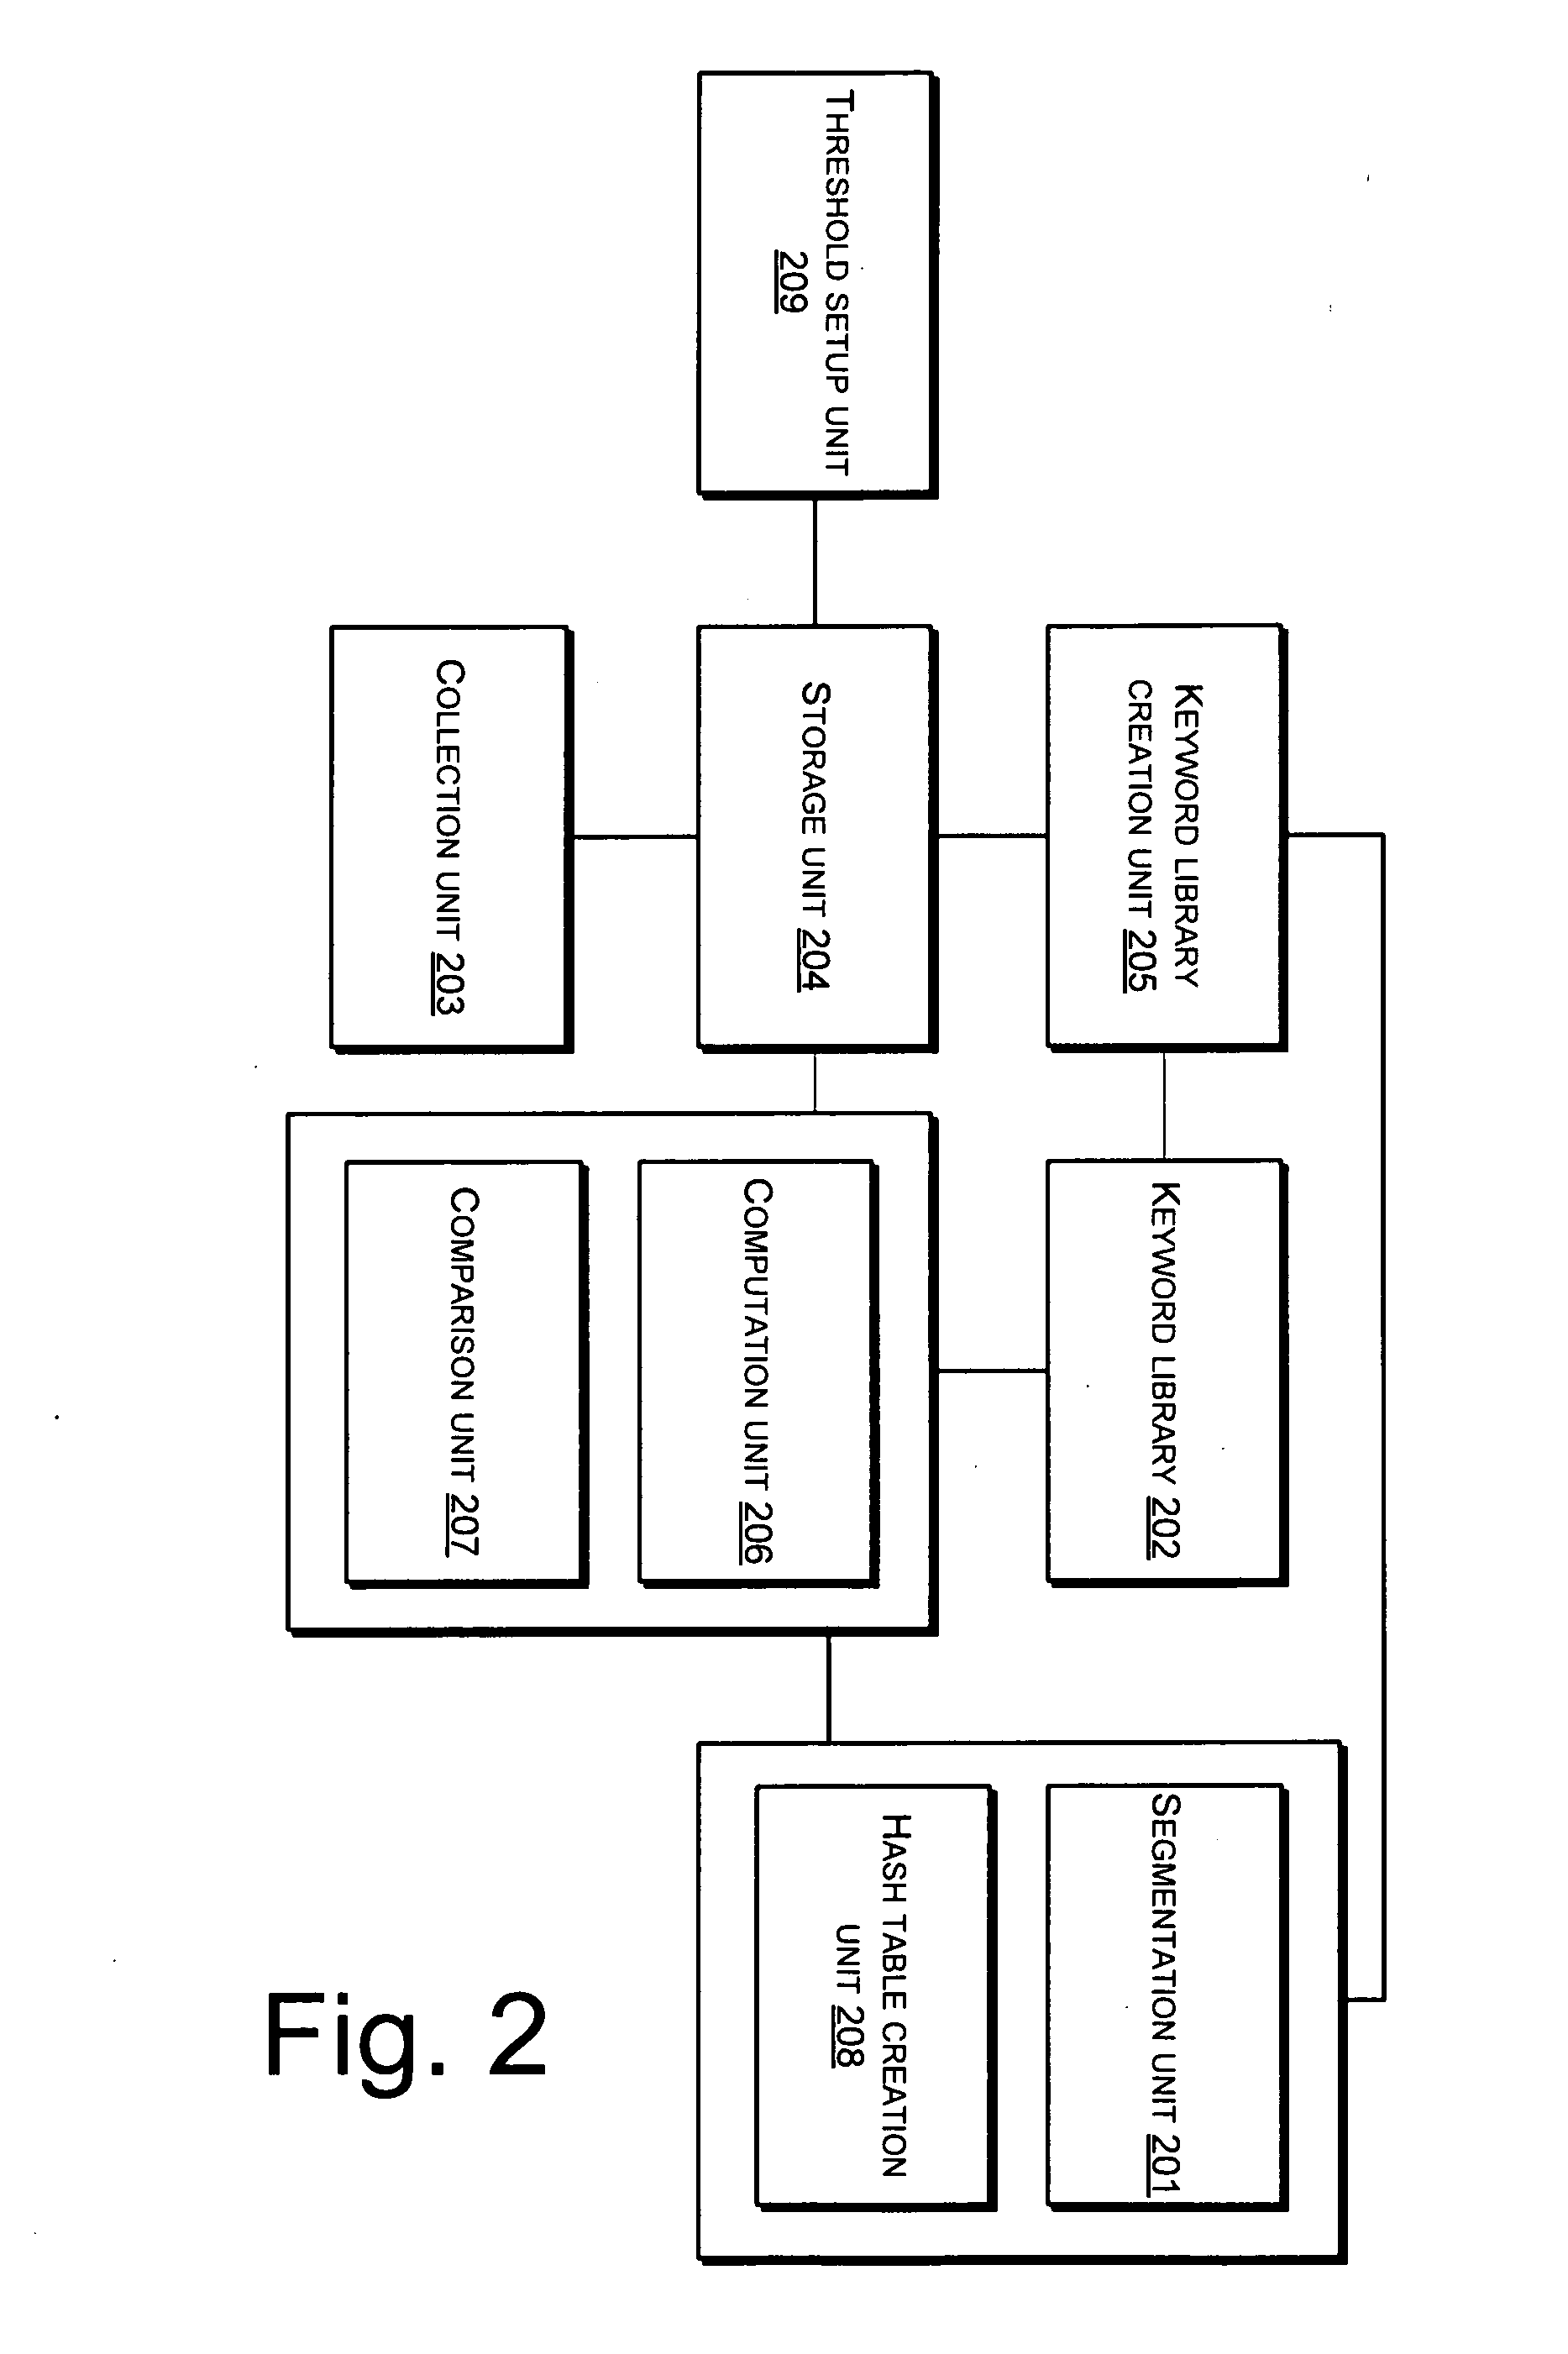 Network-Based Method and Apparatus for Filtering Junk Messages